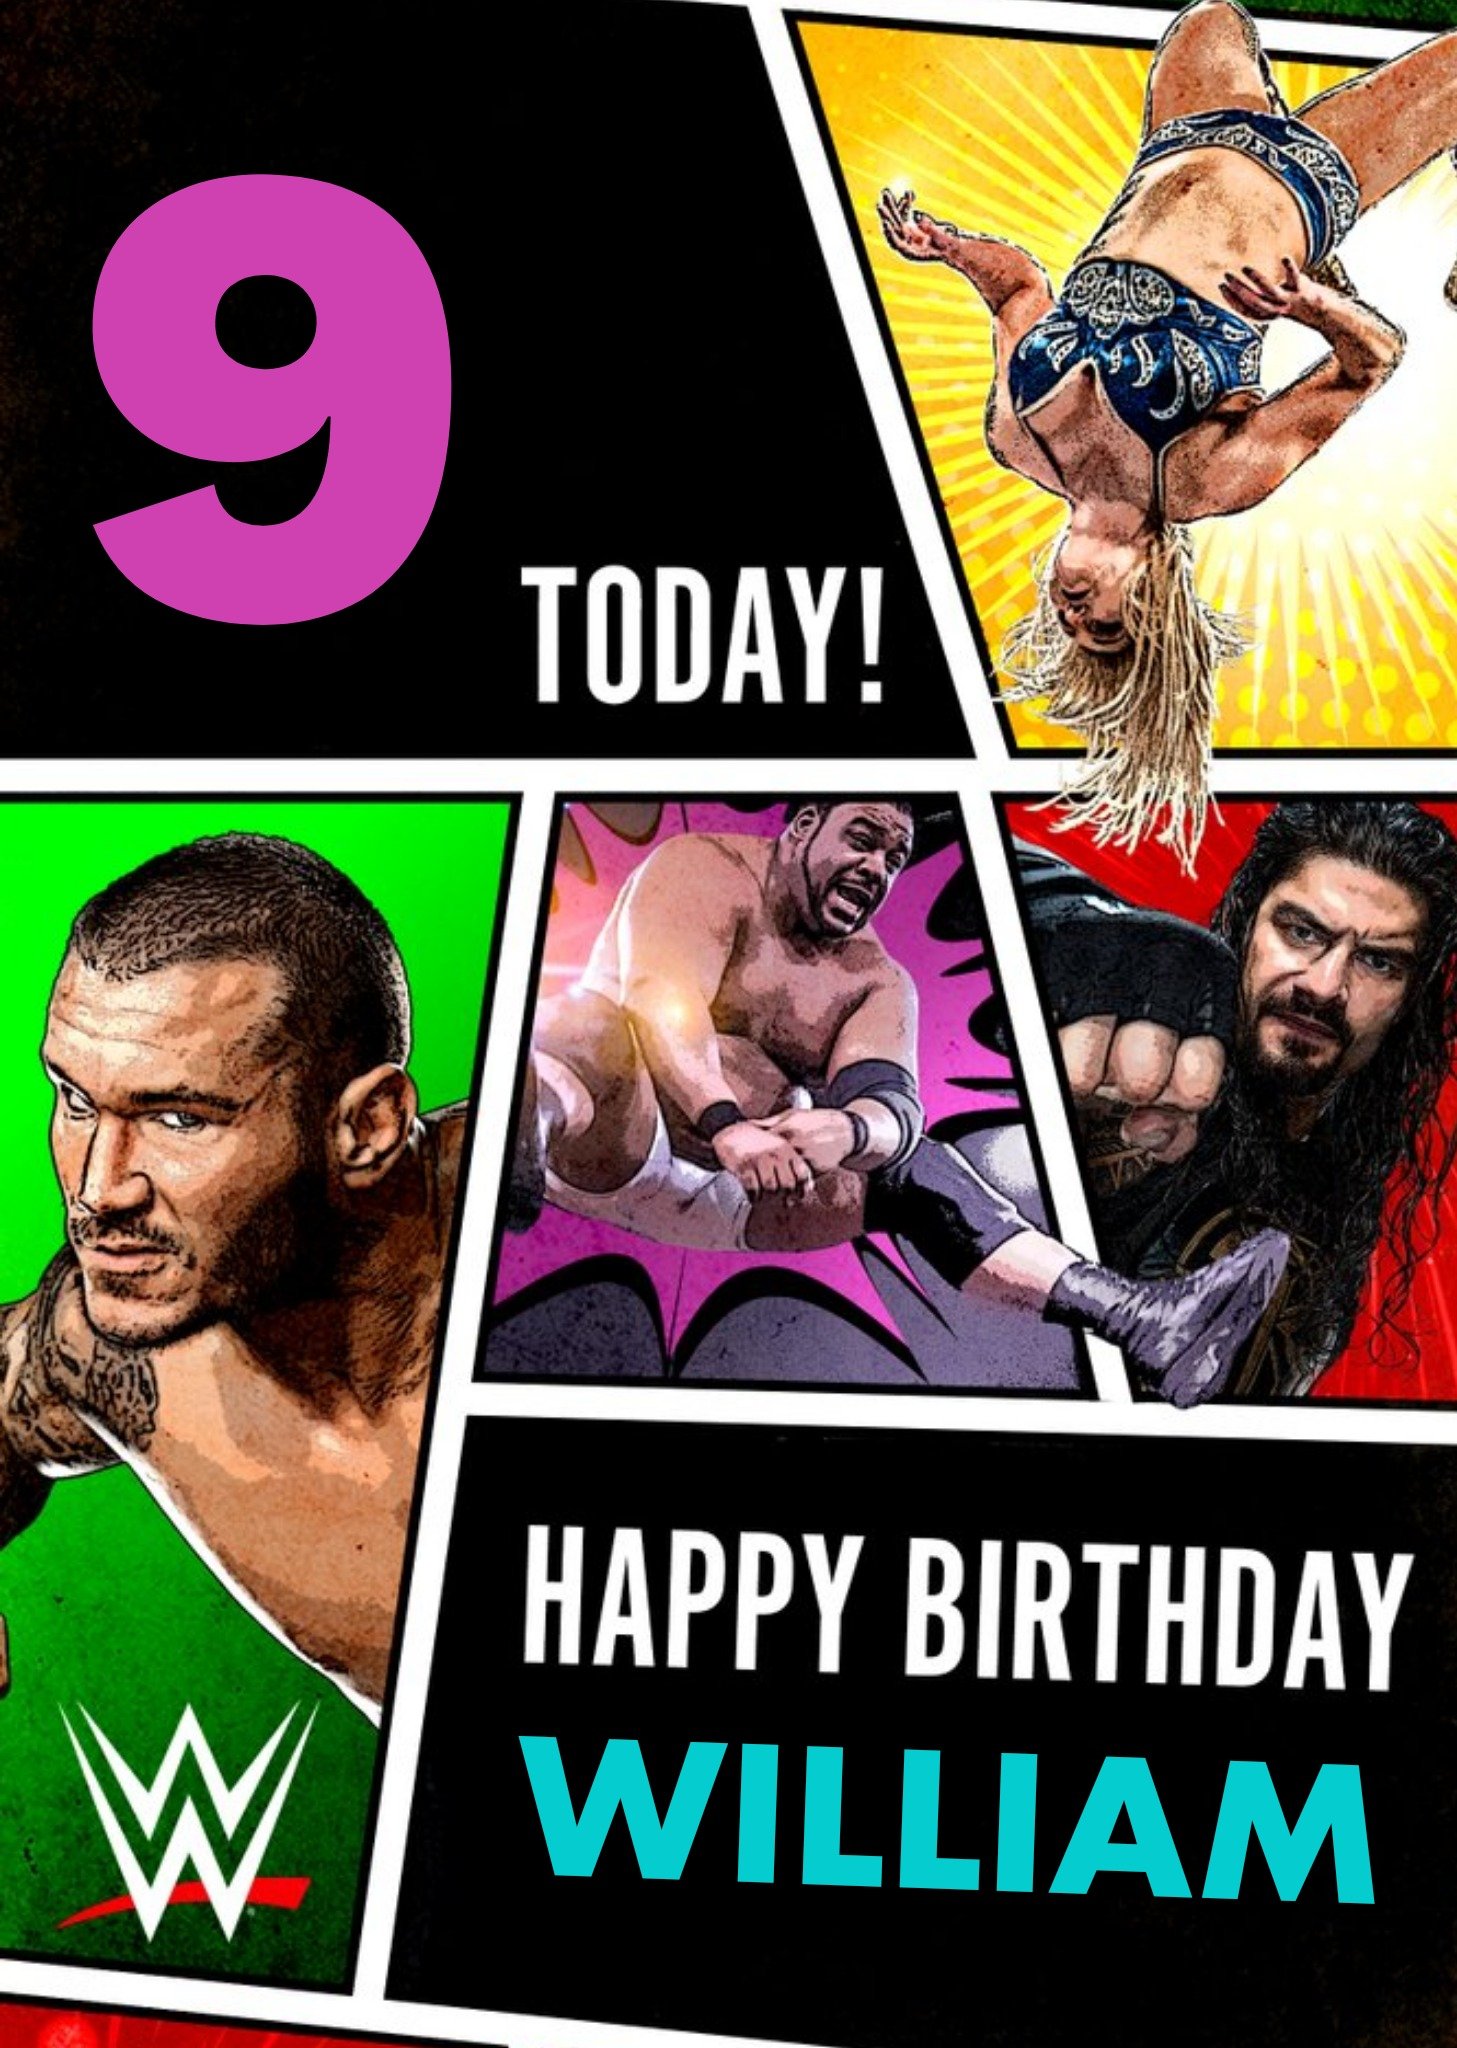 Wwe 9 Today Wrestlers Birthday Card, Large